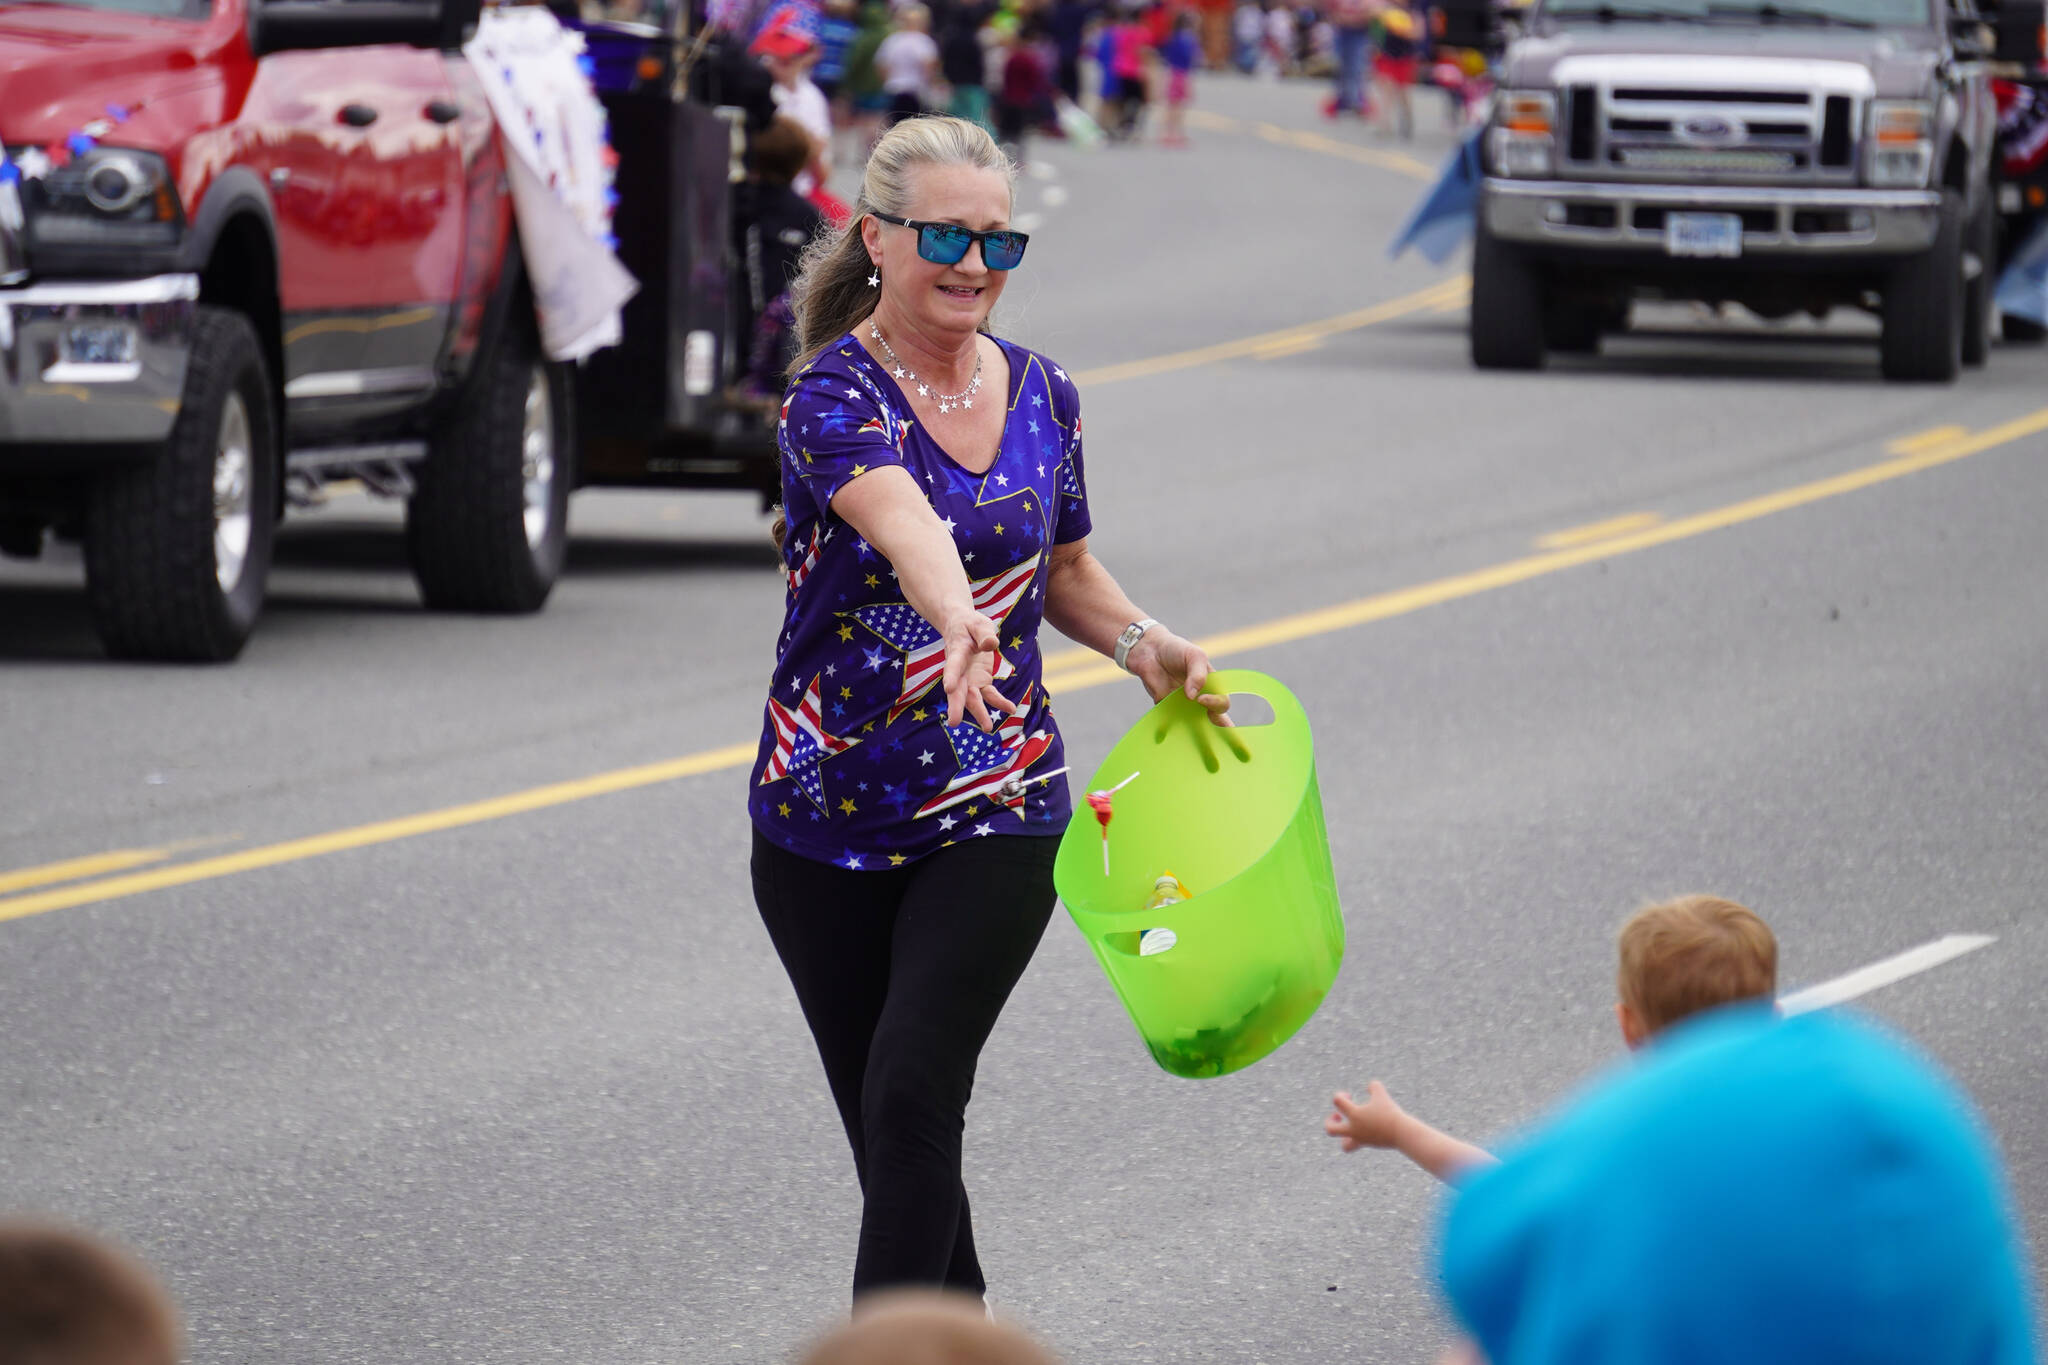 Children reach out for candy thrown as the Fourth of July Parade moves down the Kenai Spur Highway in Kenai, Alaska on Tuesday, July 4, 2023. (Jake Dye/Peninsula Clarion)